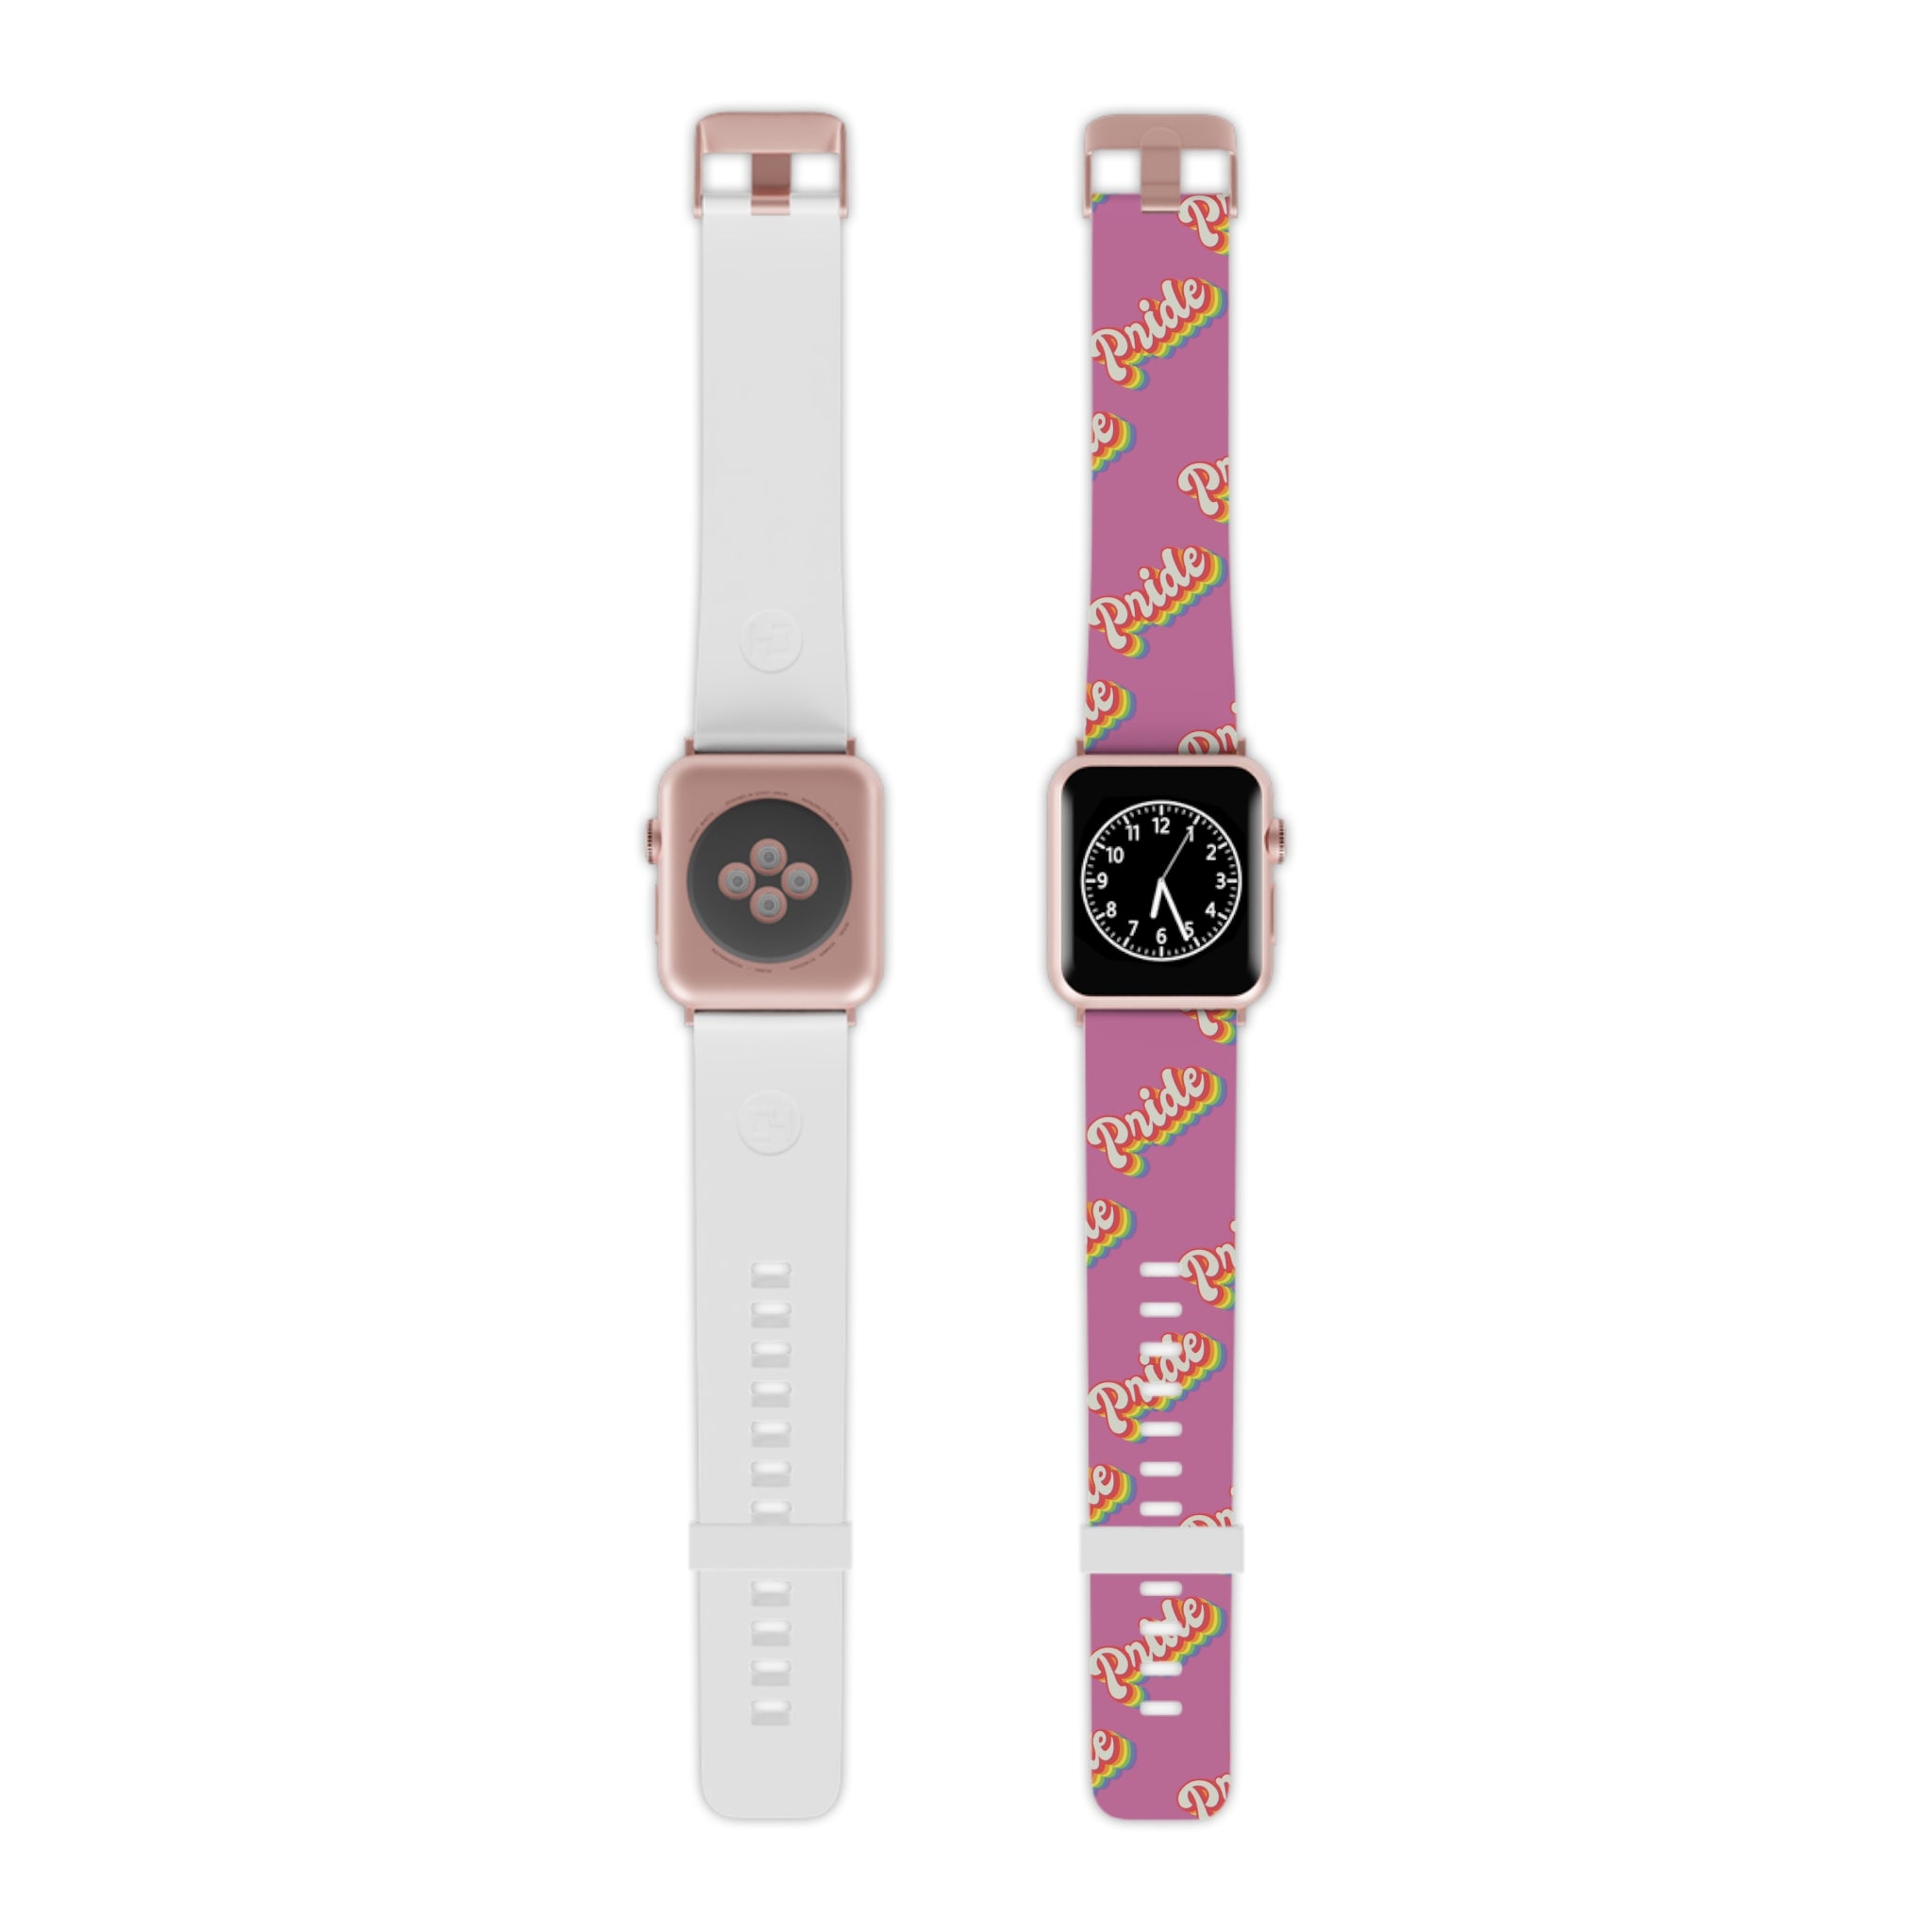 Two custom-printed Pride Bands for Apple Watch in pink and white, offering a fashionable alternative on a white background.